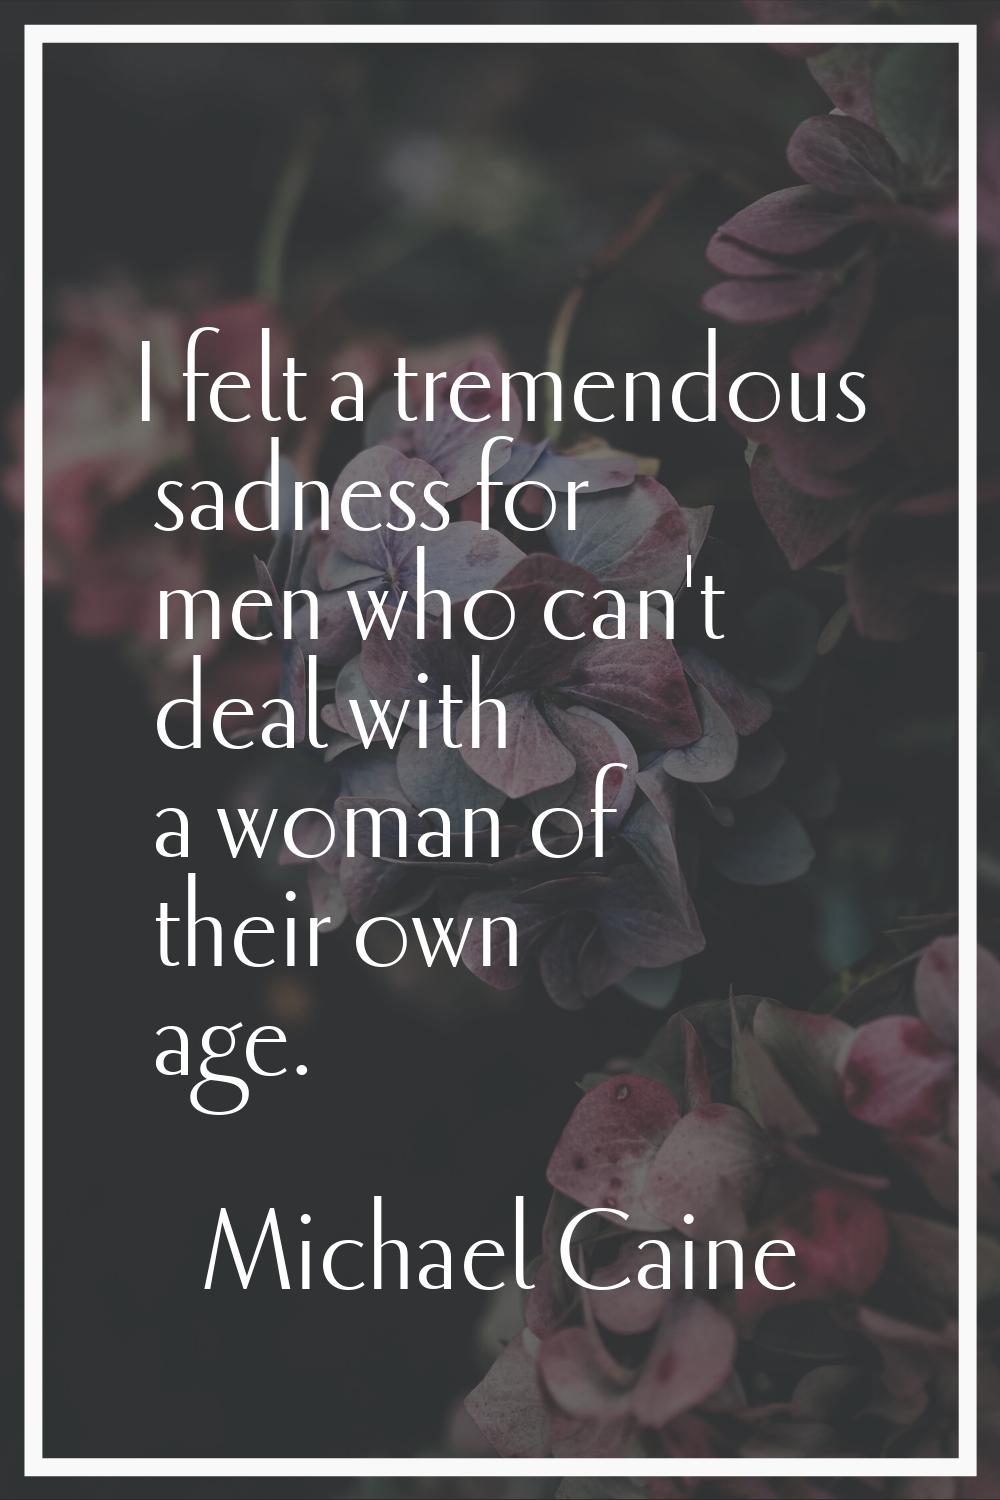 I felt a tremendous sadness for men who can't deal with a woman of their own age.